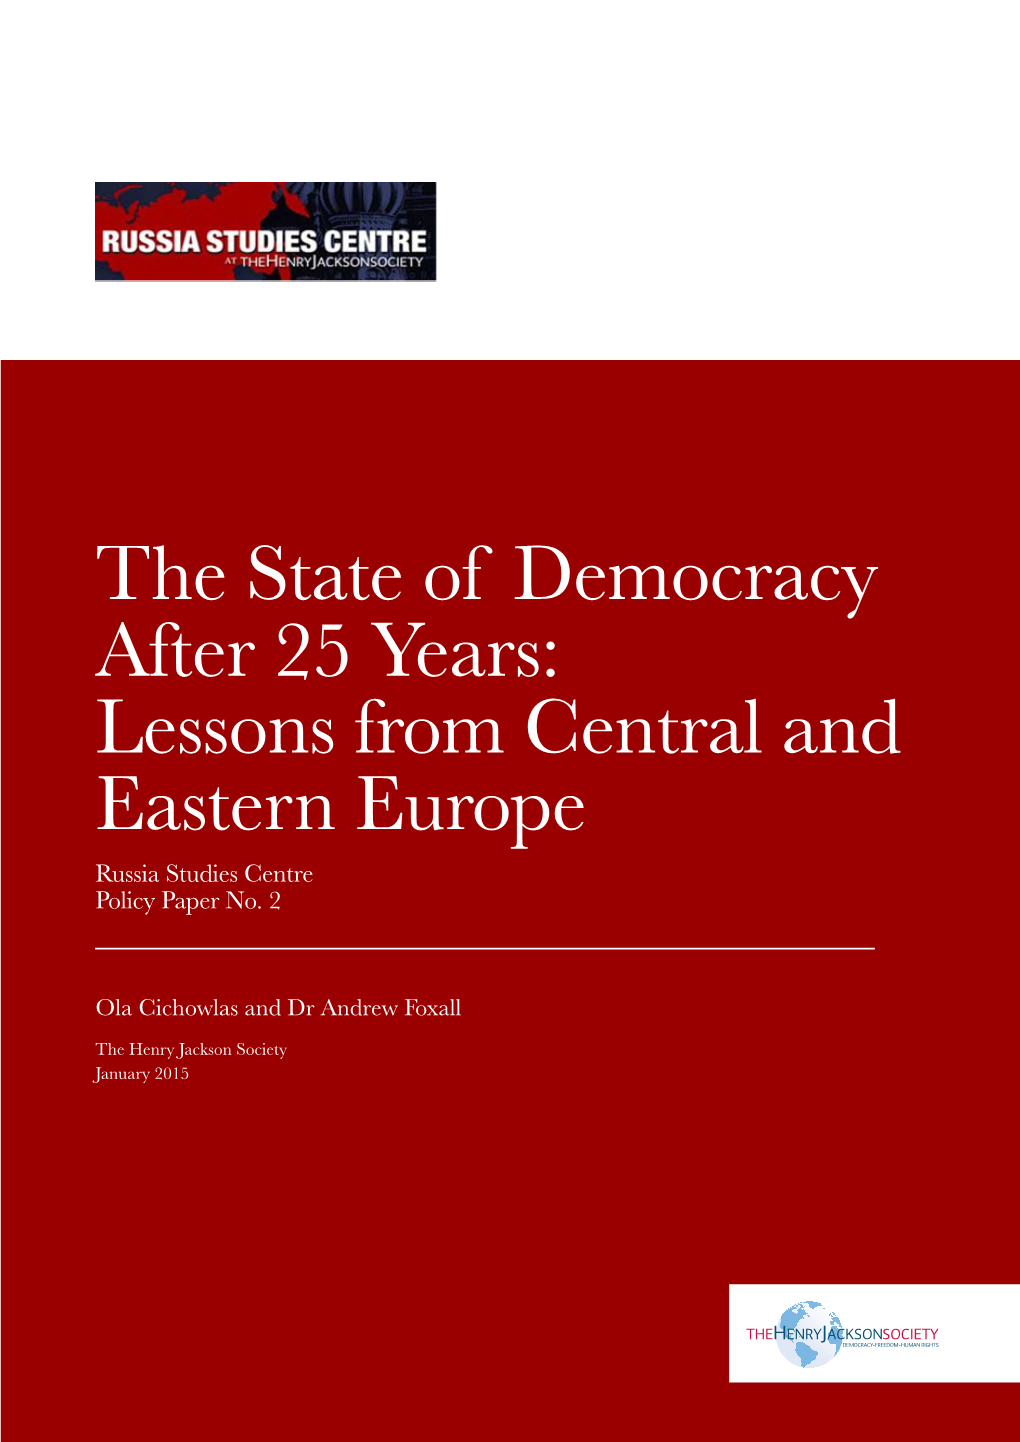 The State of Democracy After 25 Years: Lessons from Central and Eastern Europe Russia Studies Centre Policy Paper No